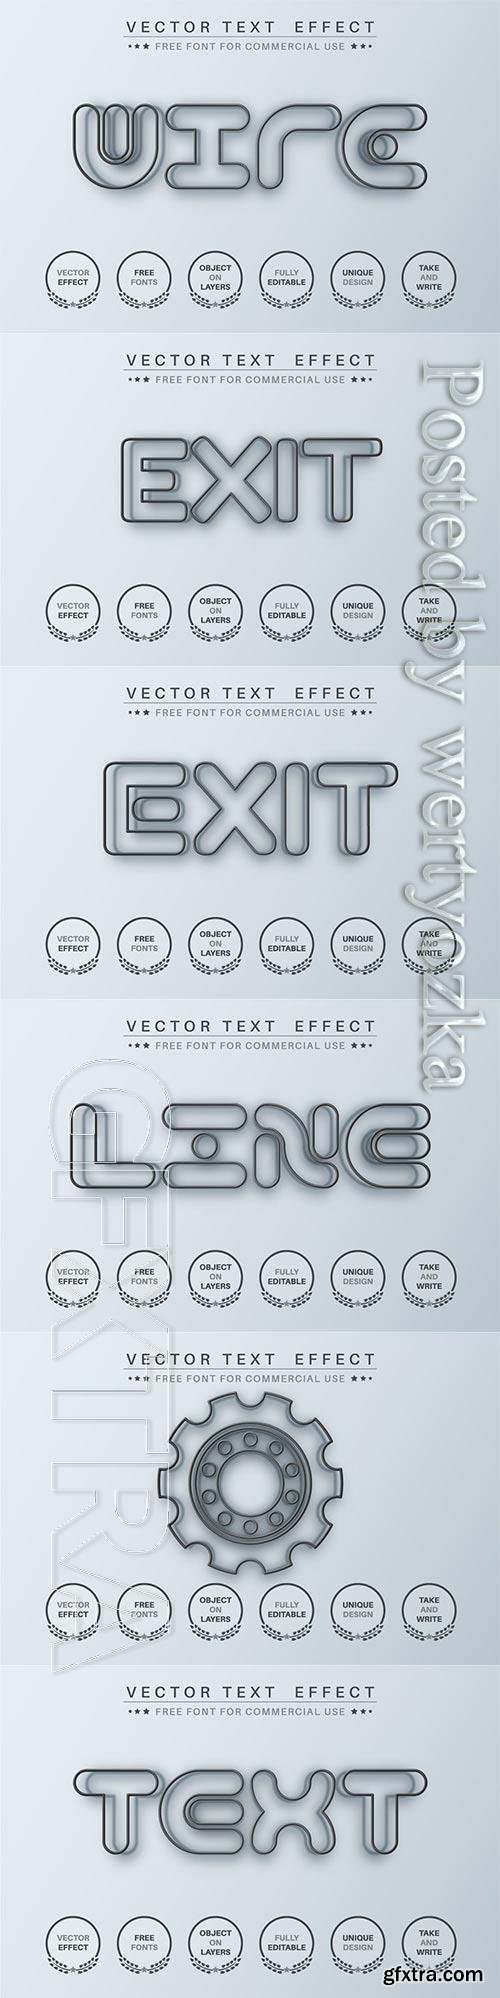 Black wire - editable text effect, font style